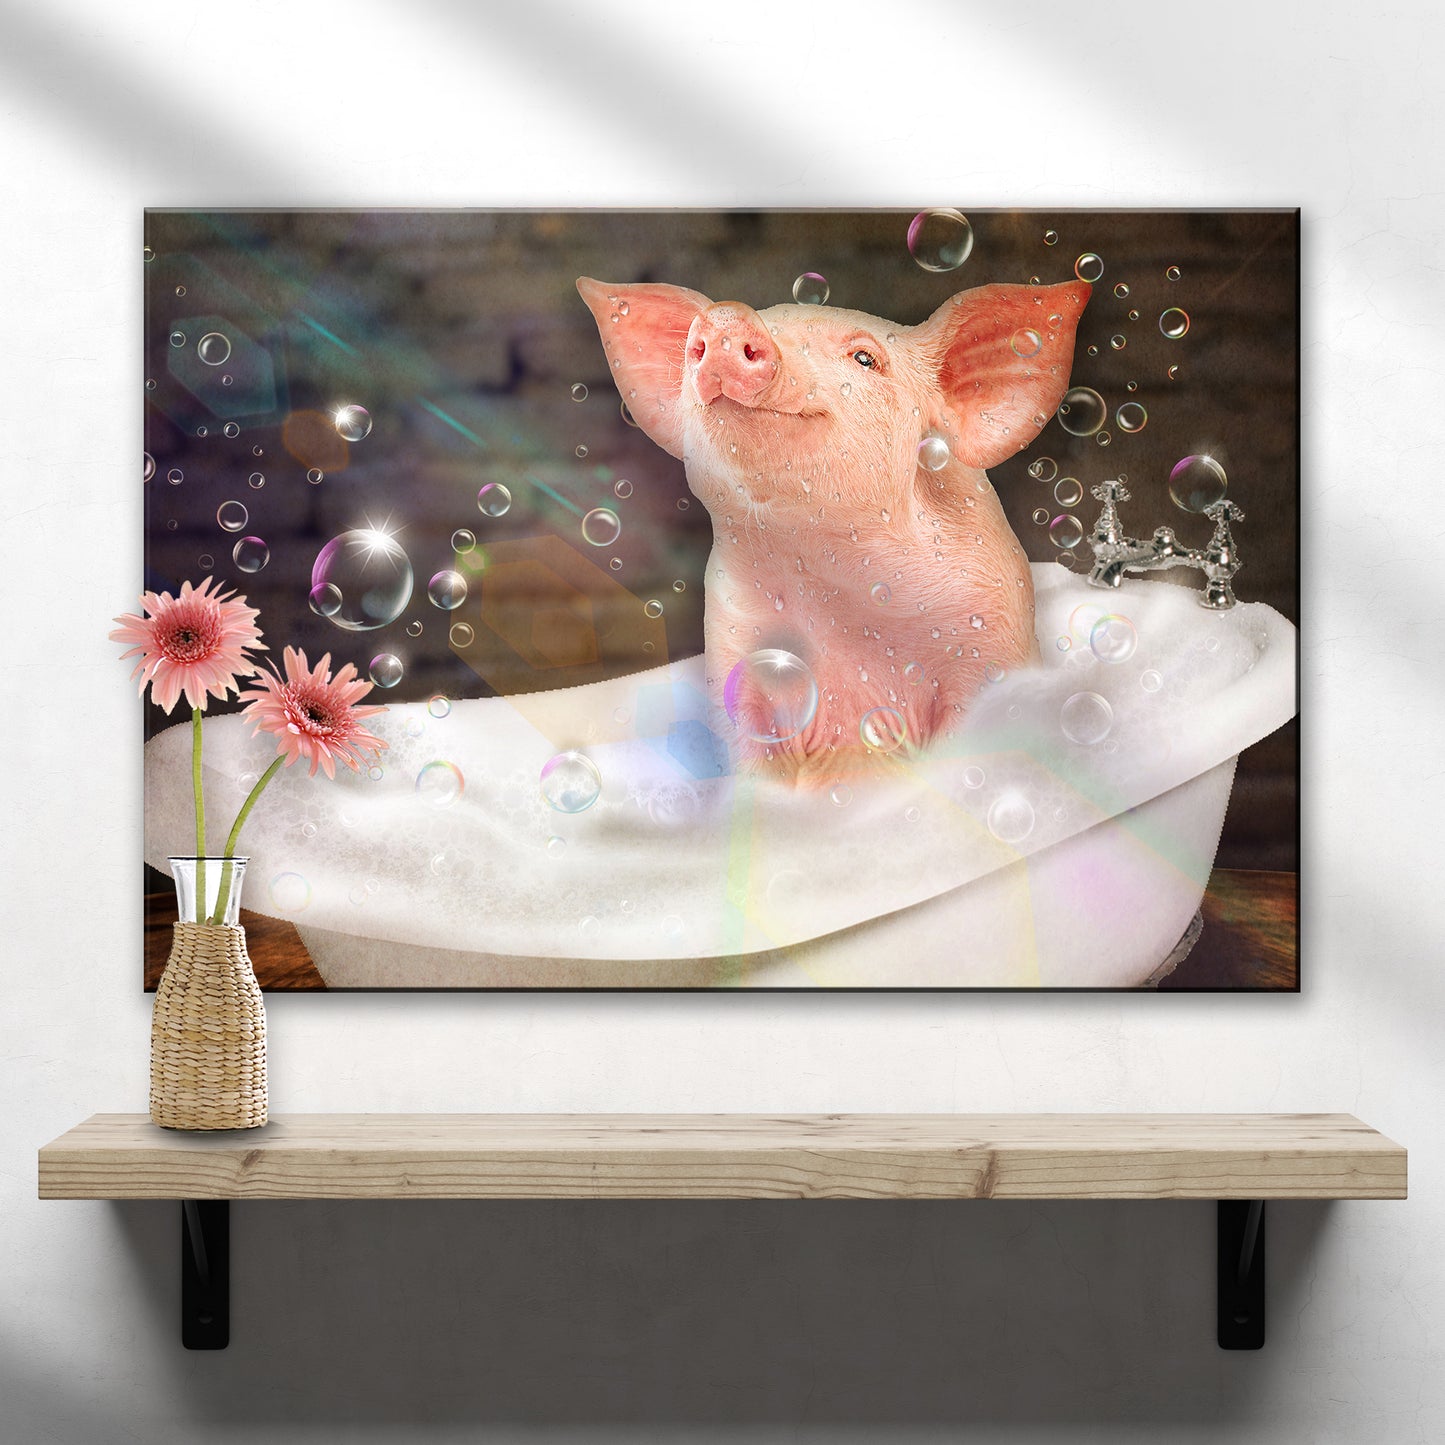 Bubble Bath Pig In Tub Canvas Wall Art - Image by Tailored Canvases